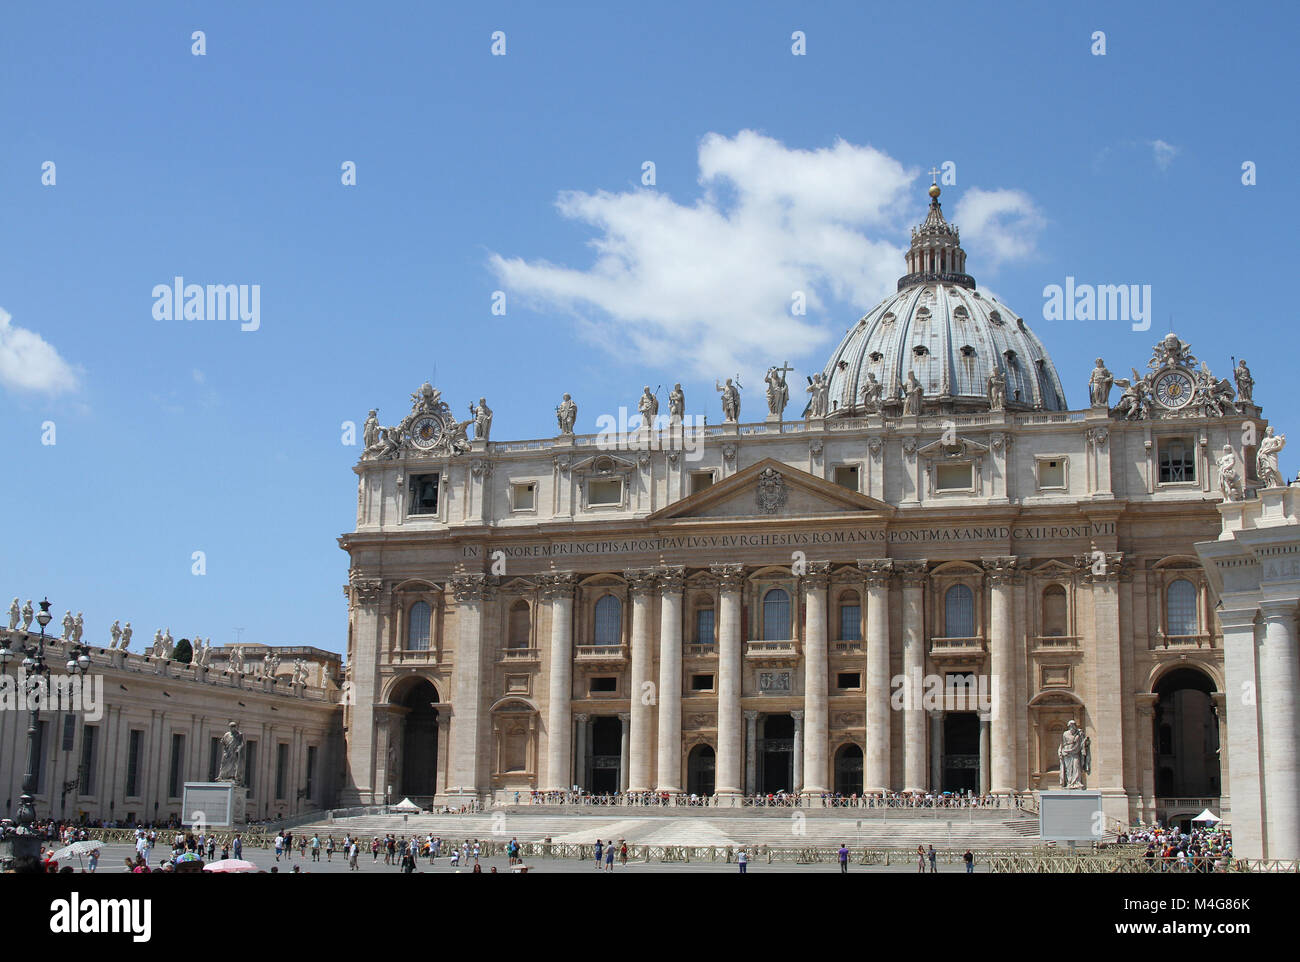 Front view of the Papal Basilica of St. Peter in the Vatican (AKA St. Peter's Basilica), Vatican City, Rome, Italy. Stock Photo